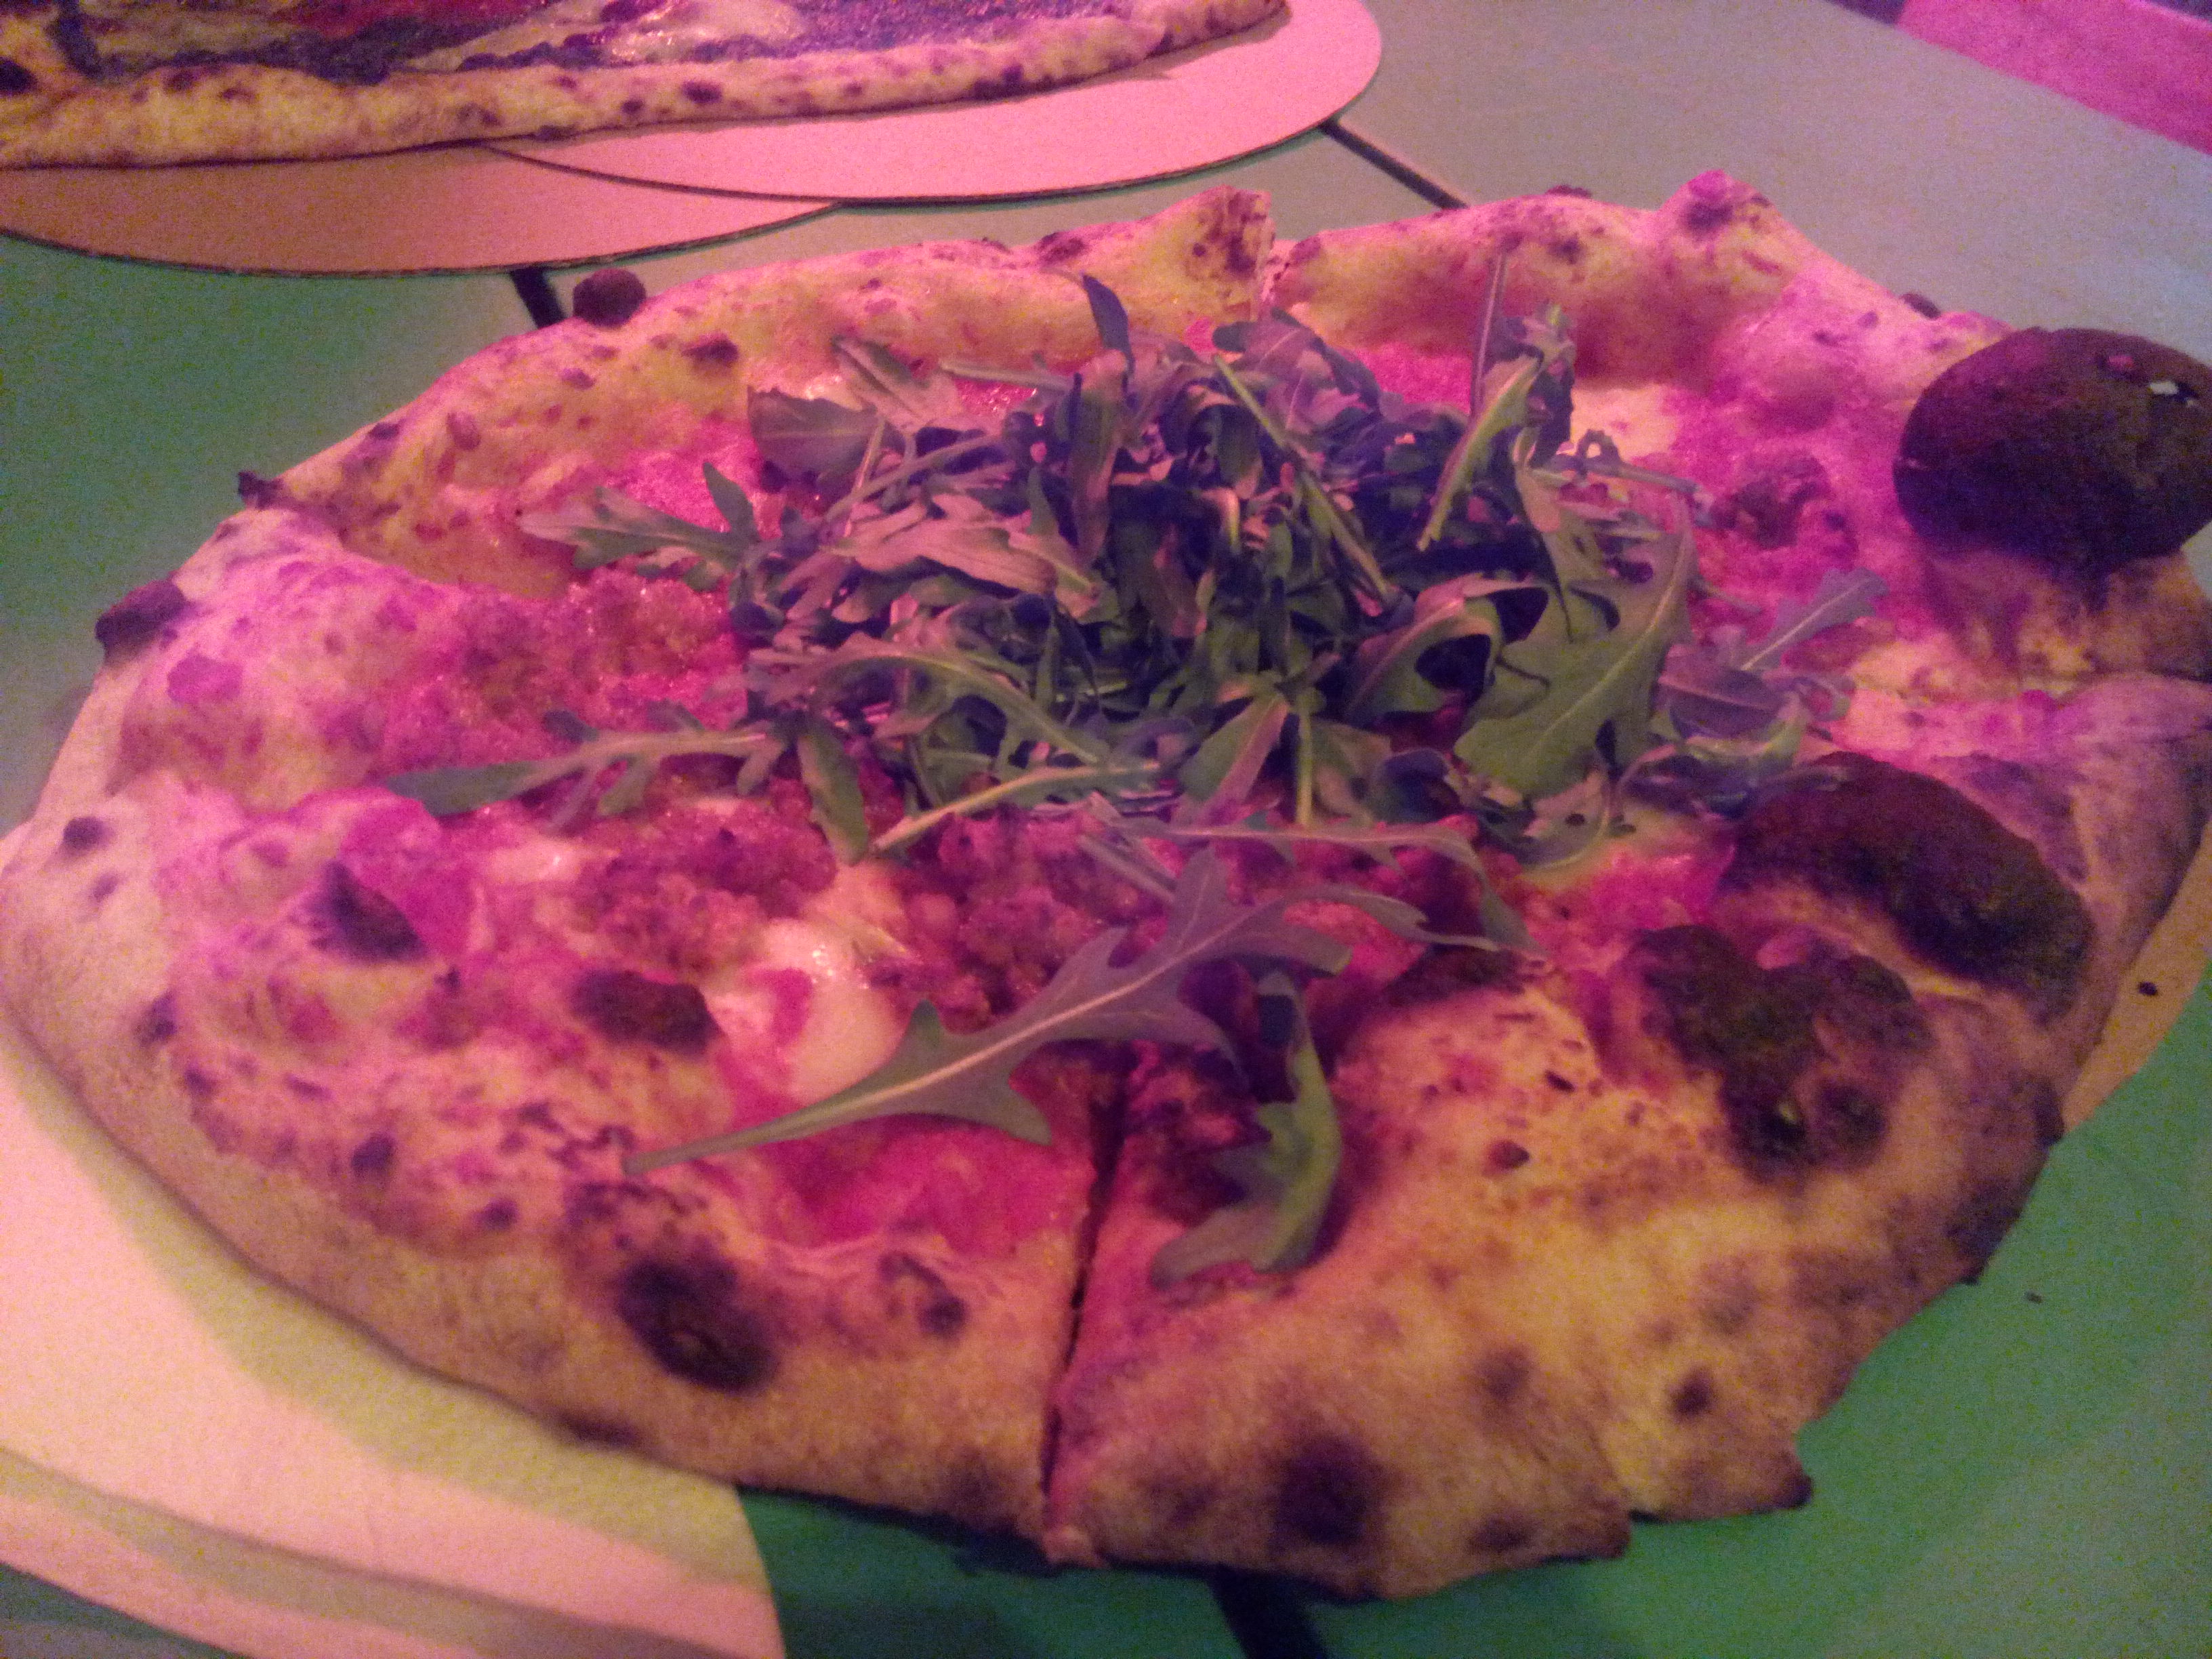 Dimly lit pizza with rocket on